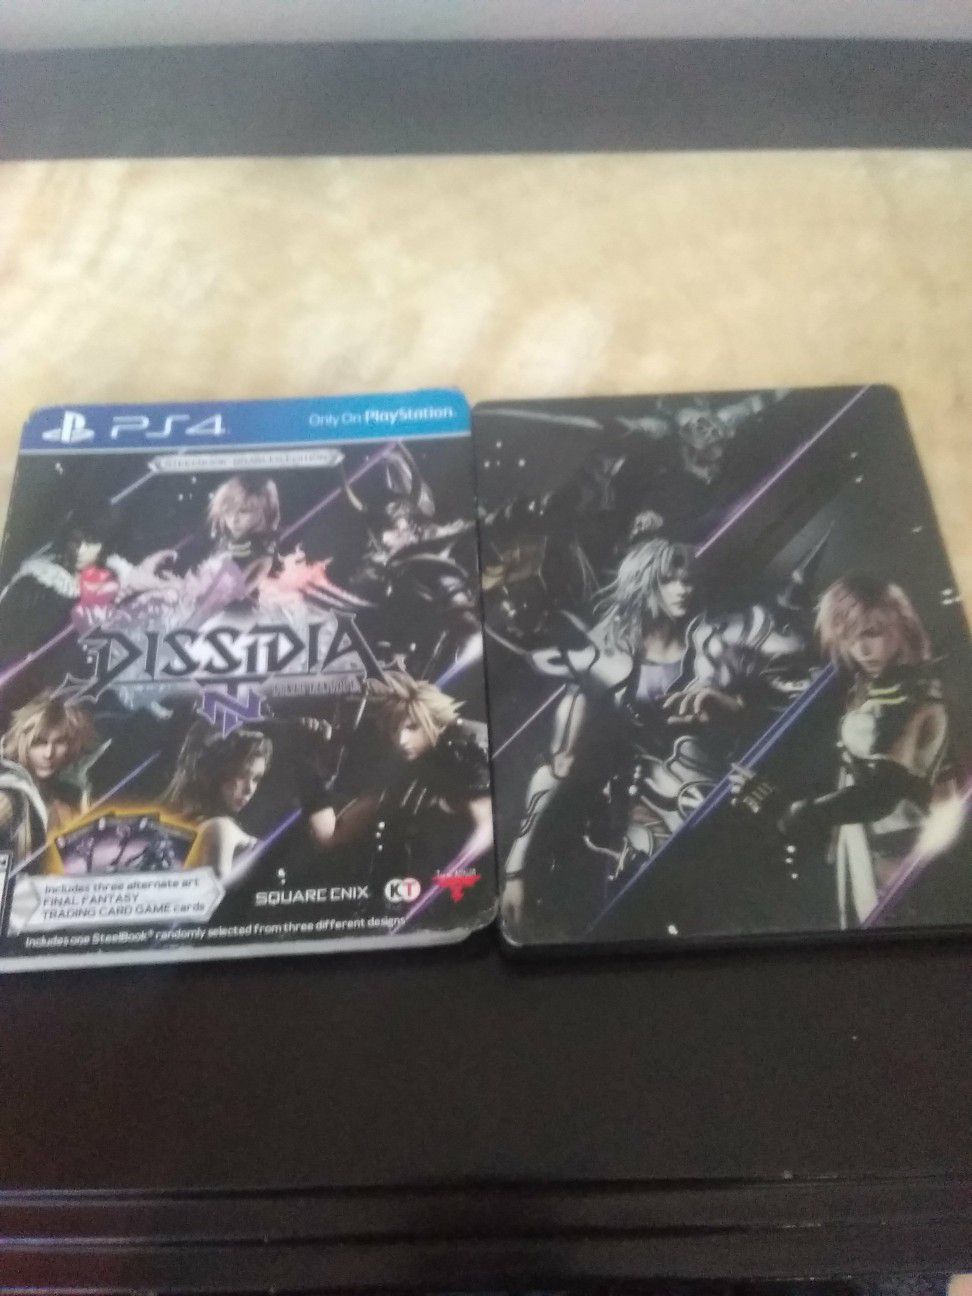 Final Fantasy Dissidia SteelCase brawler edition with collectibles